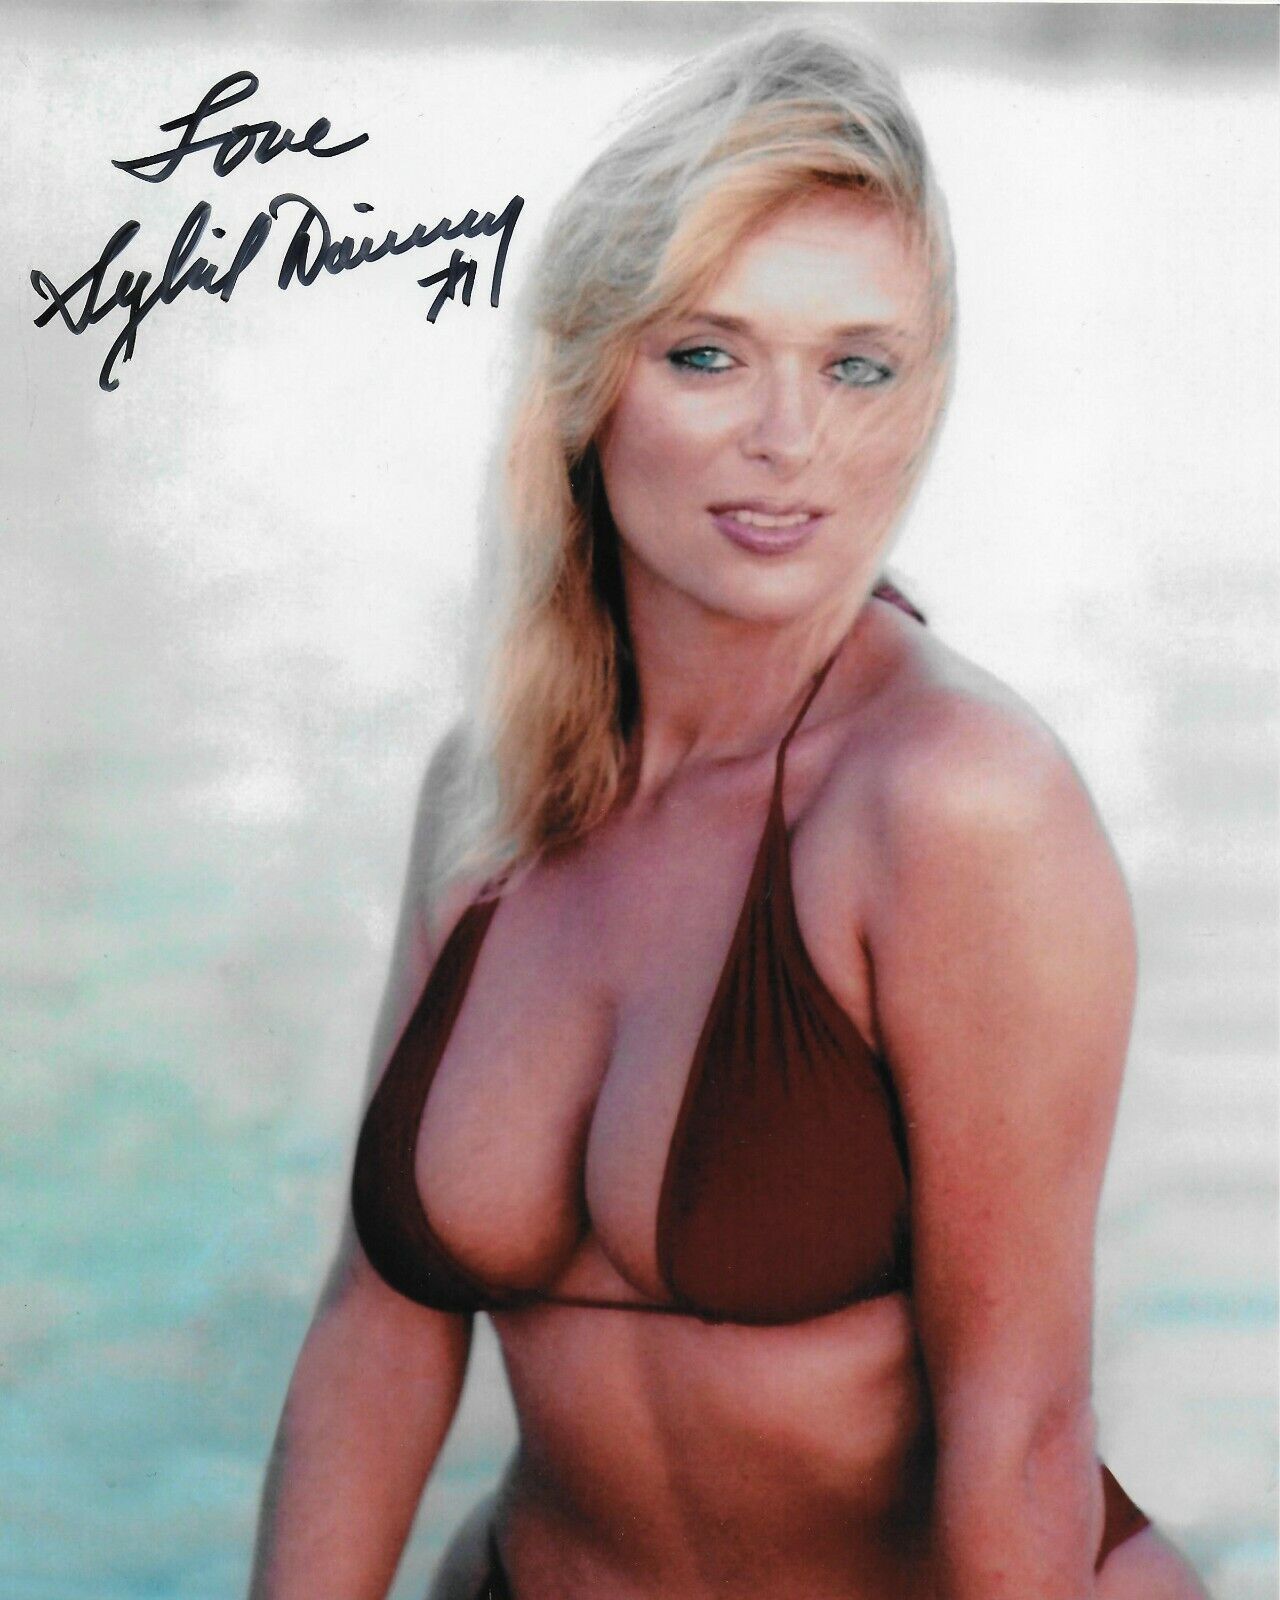 Sybil Danning Signed 8x10 Photo Poster painting - 1970's / 1980's B Movie Actress - SEXY!!! #45